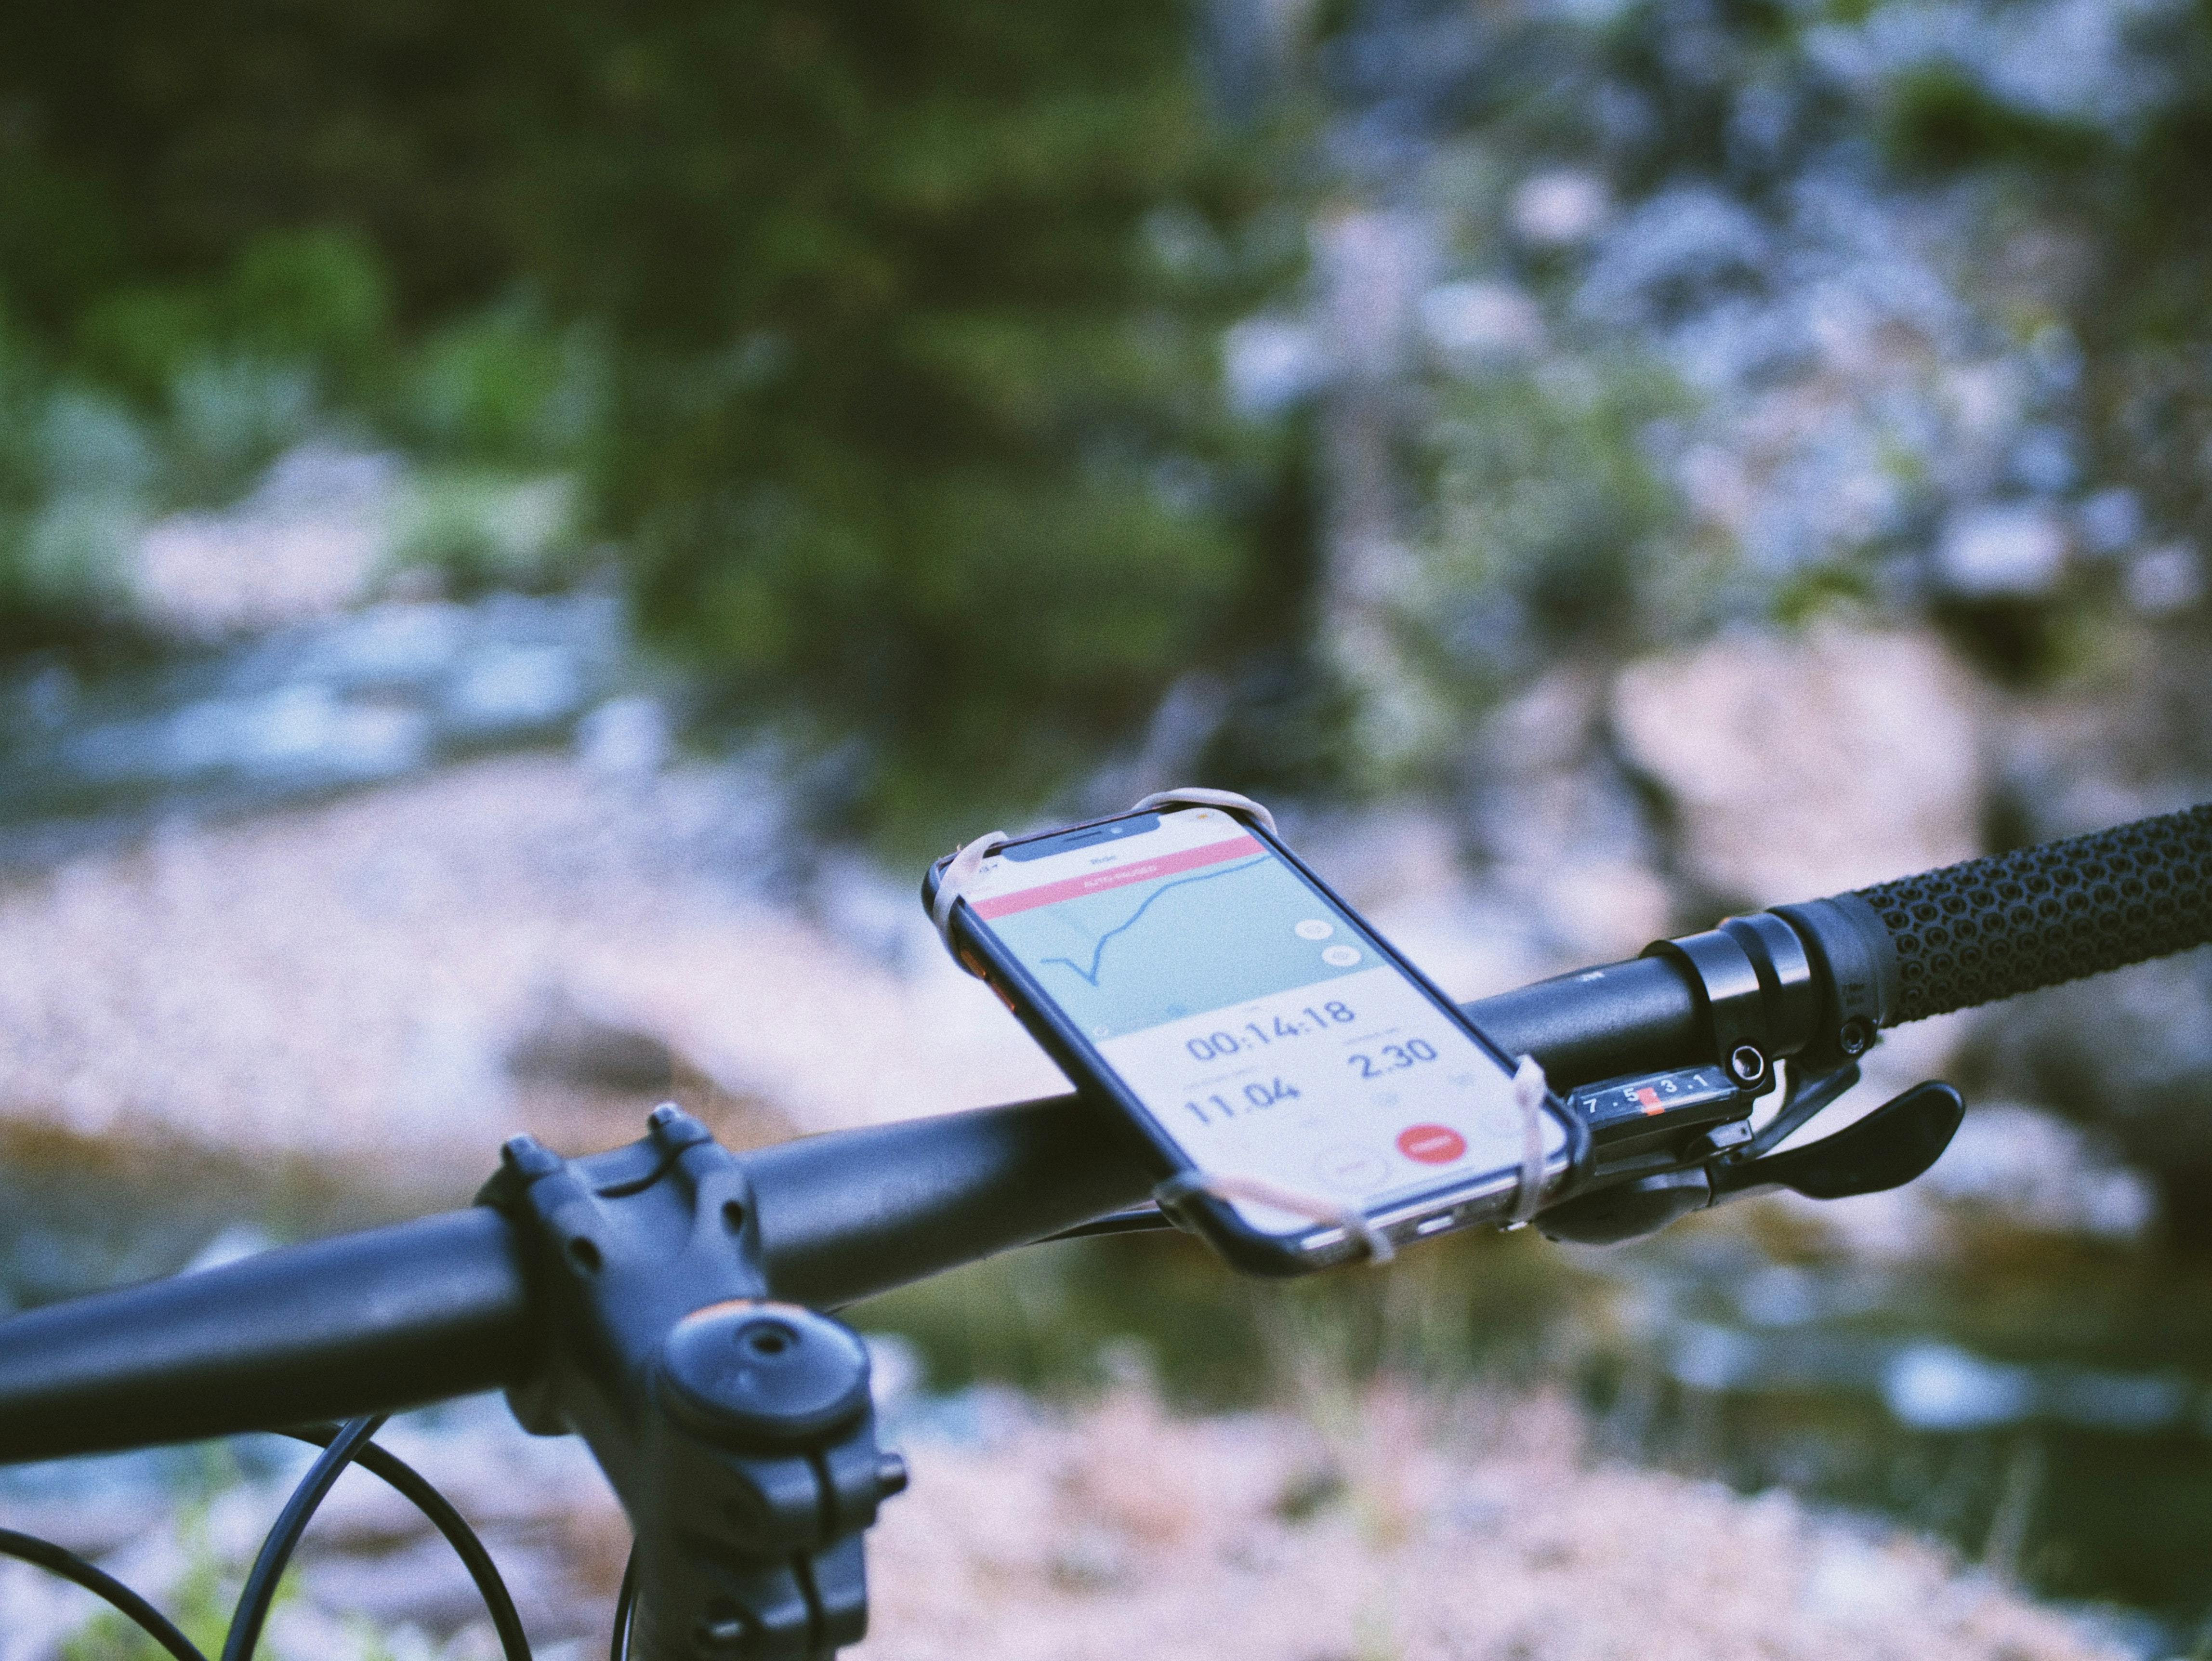 A map is pulled up on a phone and the phone is attached to the handlebars of a bike.